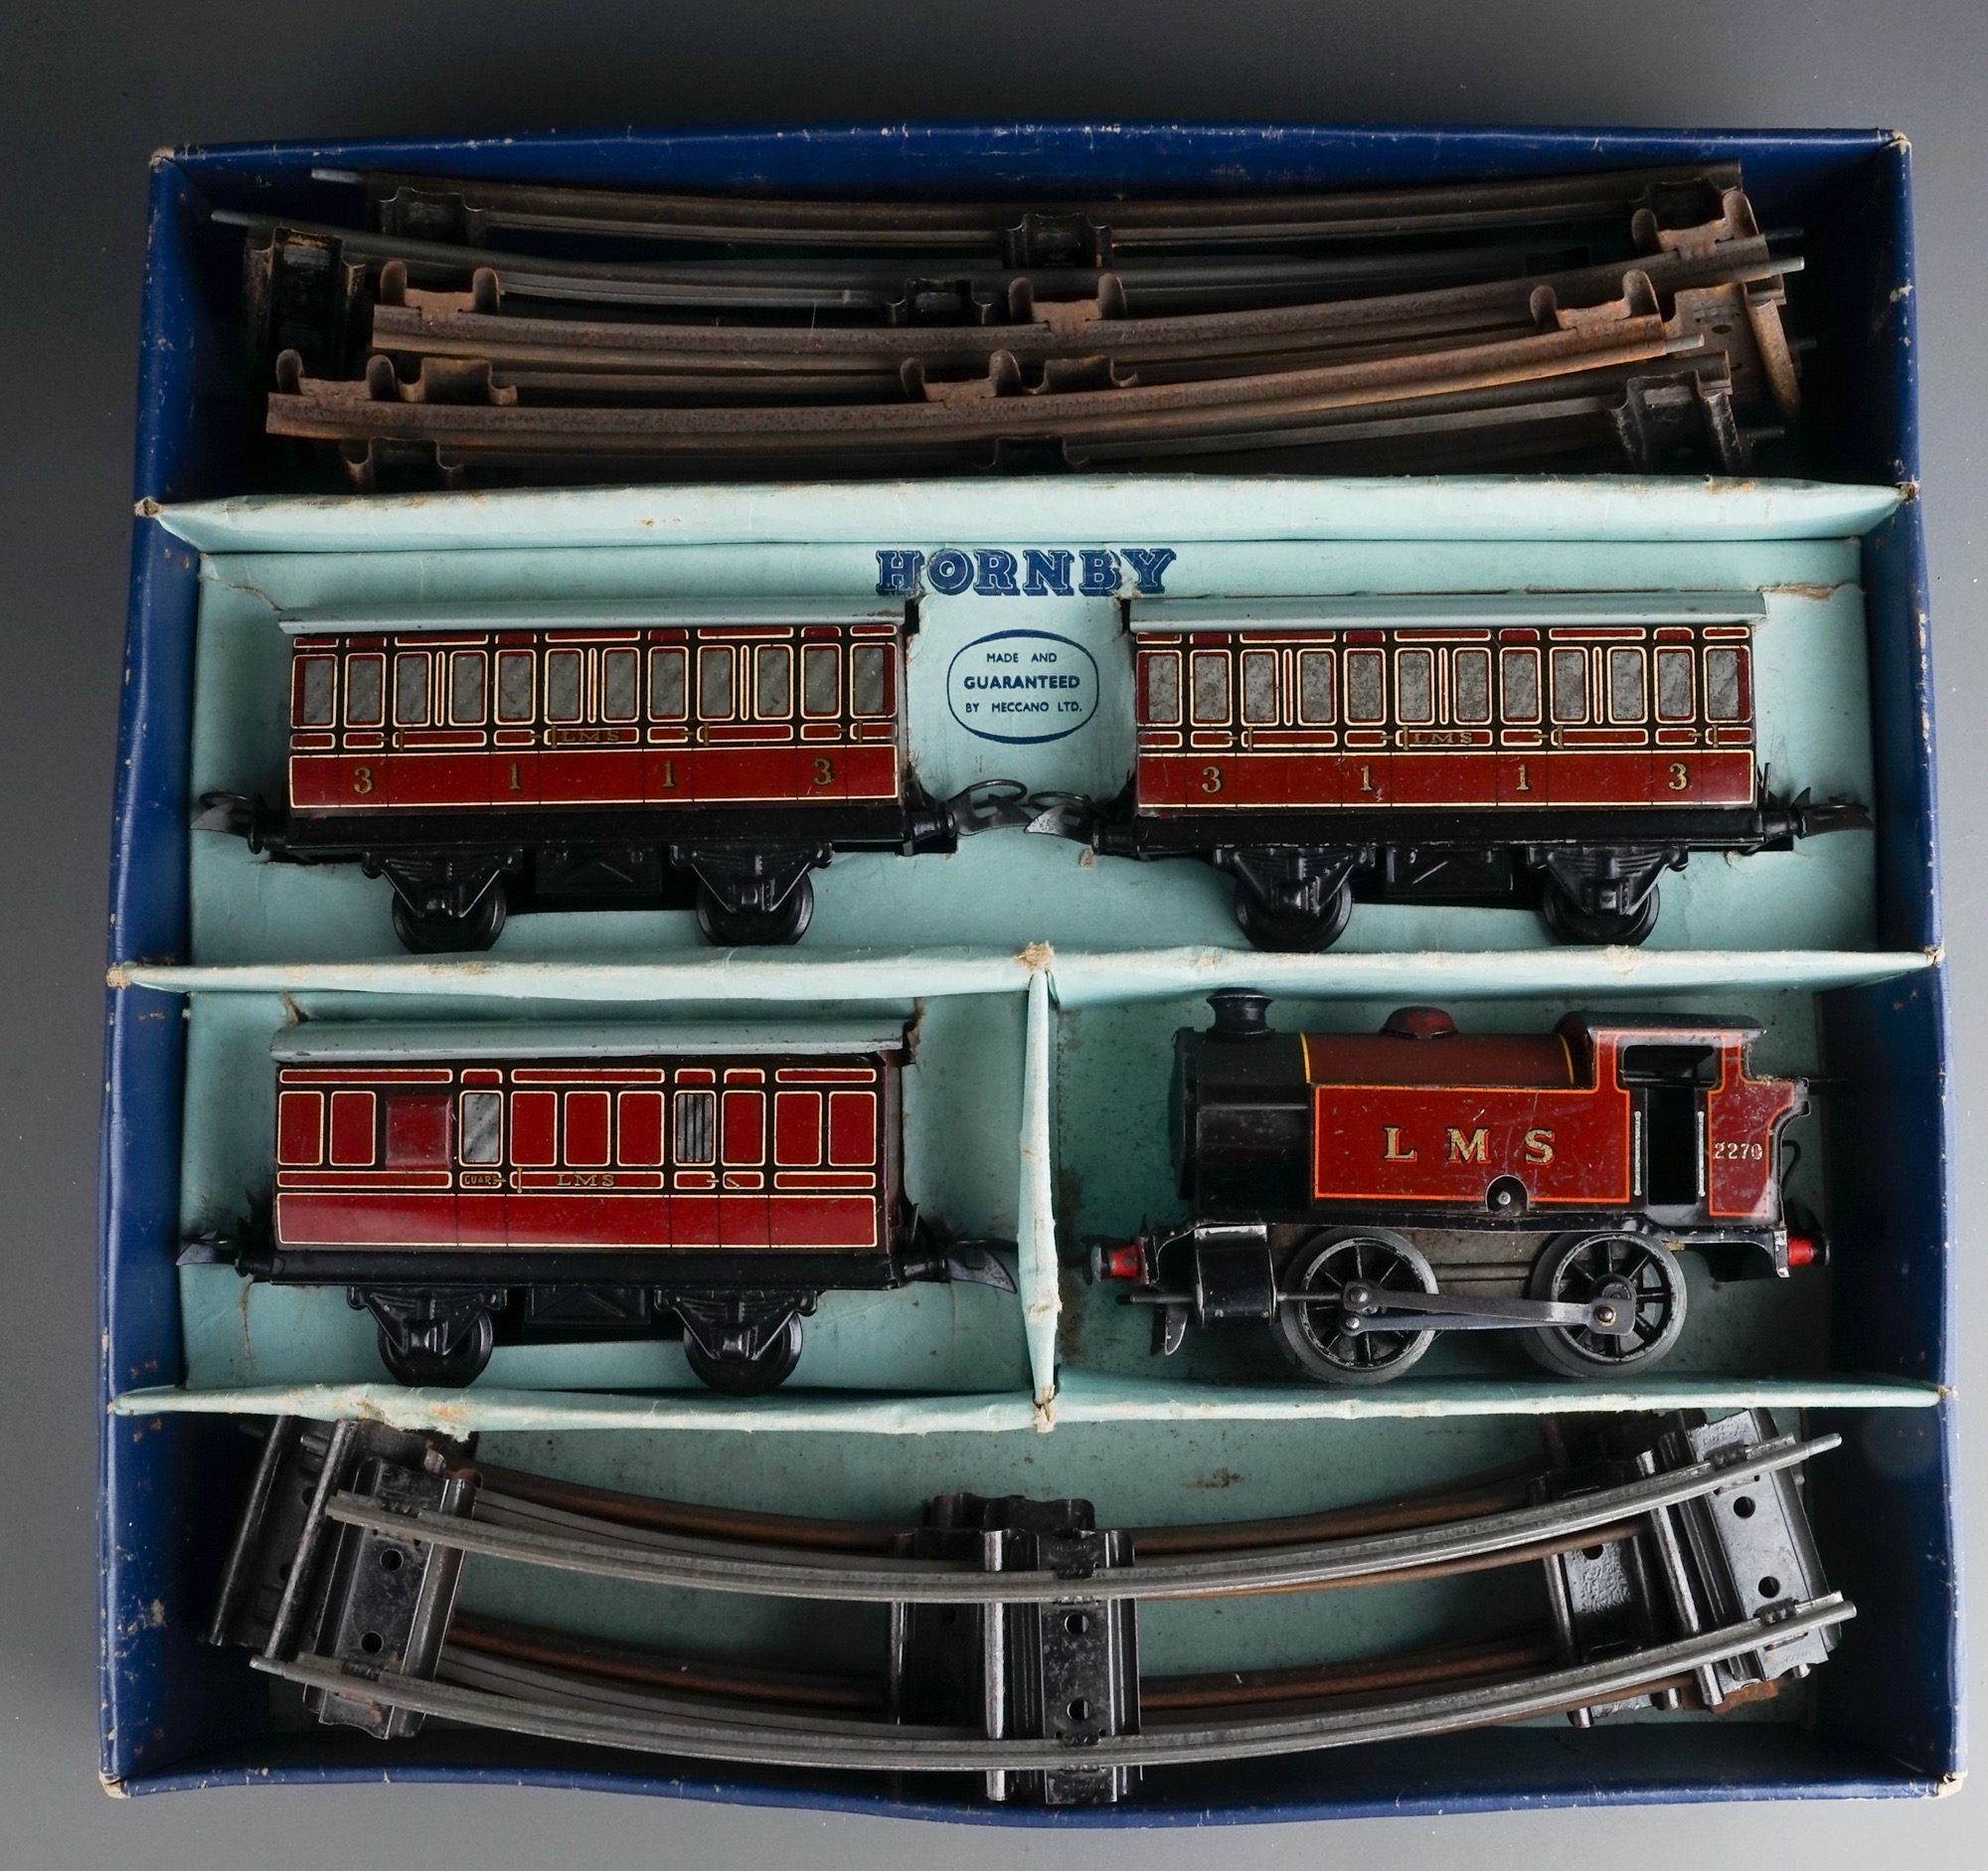 A vintage boxed Hornby Train clockwork 0 guage no 101 Tank Passenger Set made by Meccano Ltd - Image 2 of 3